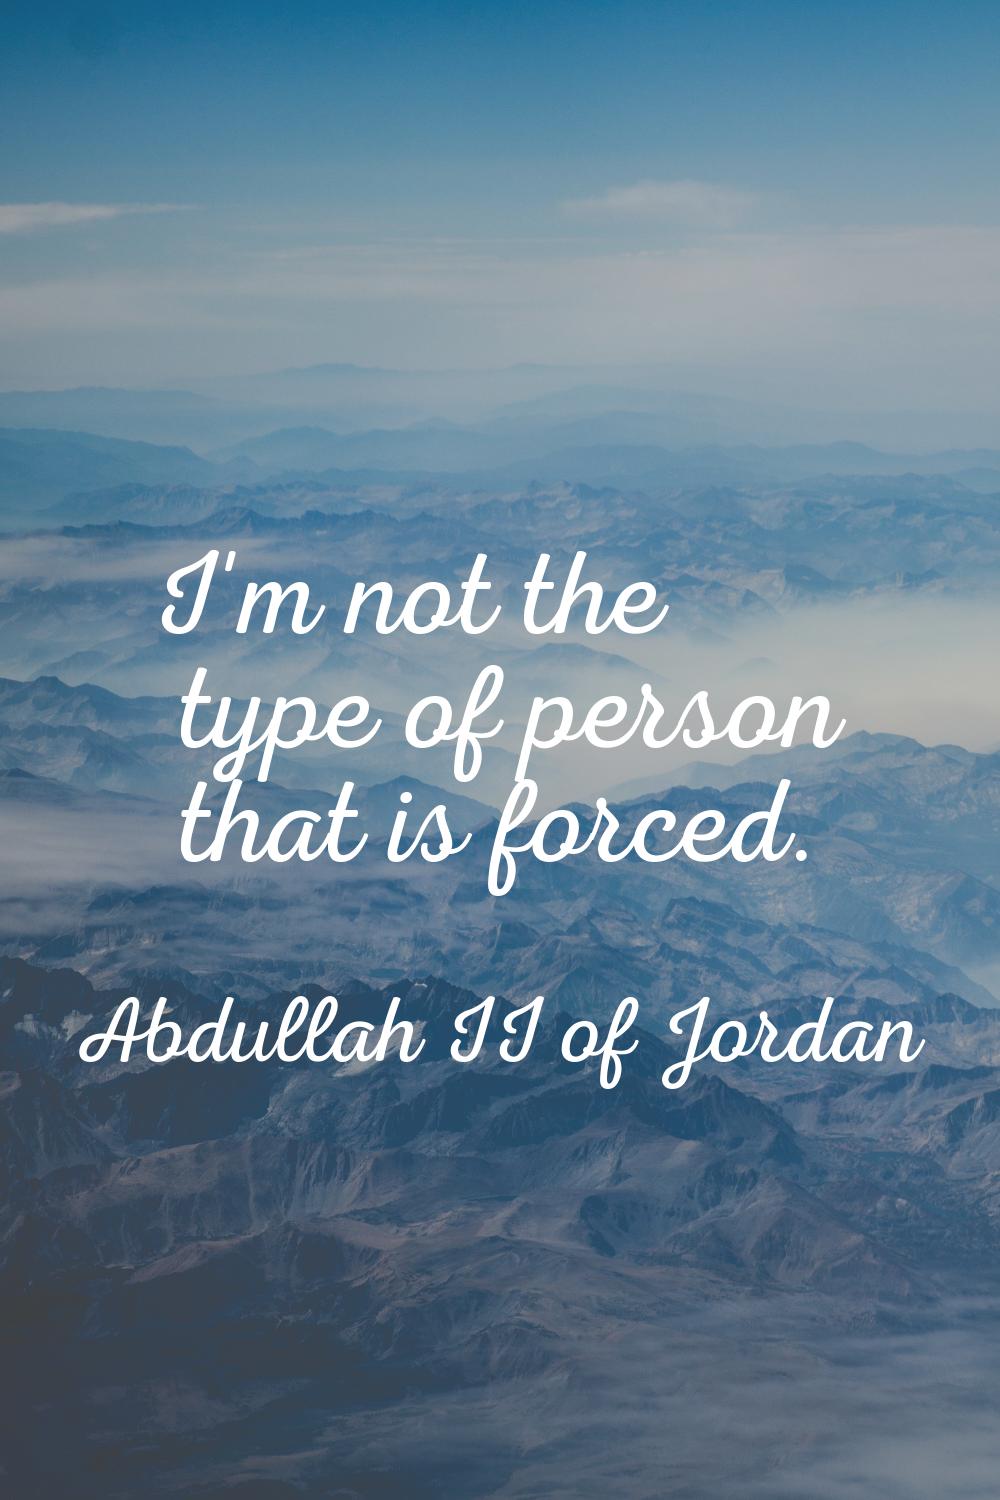 I'm not the type of person that is forced.